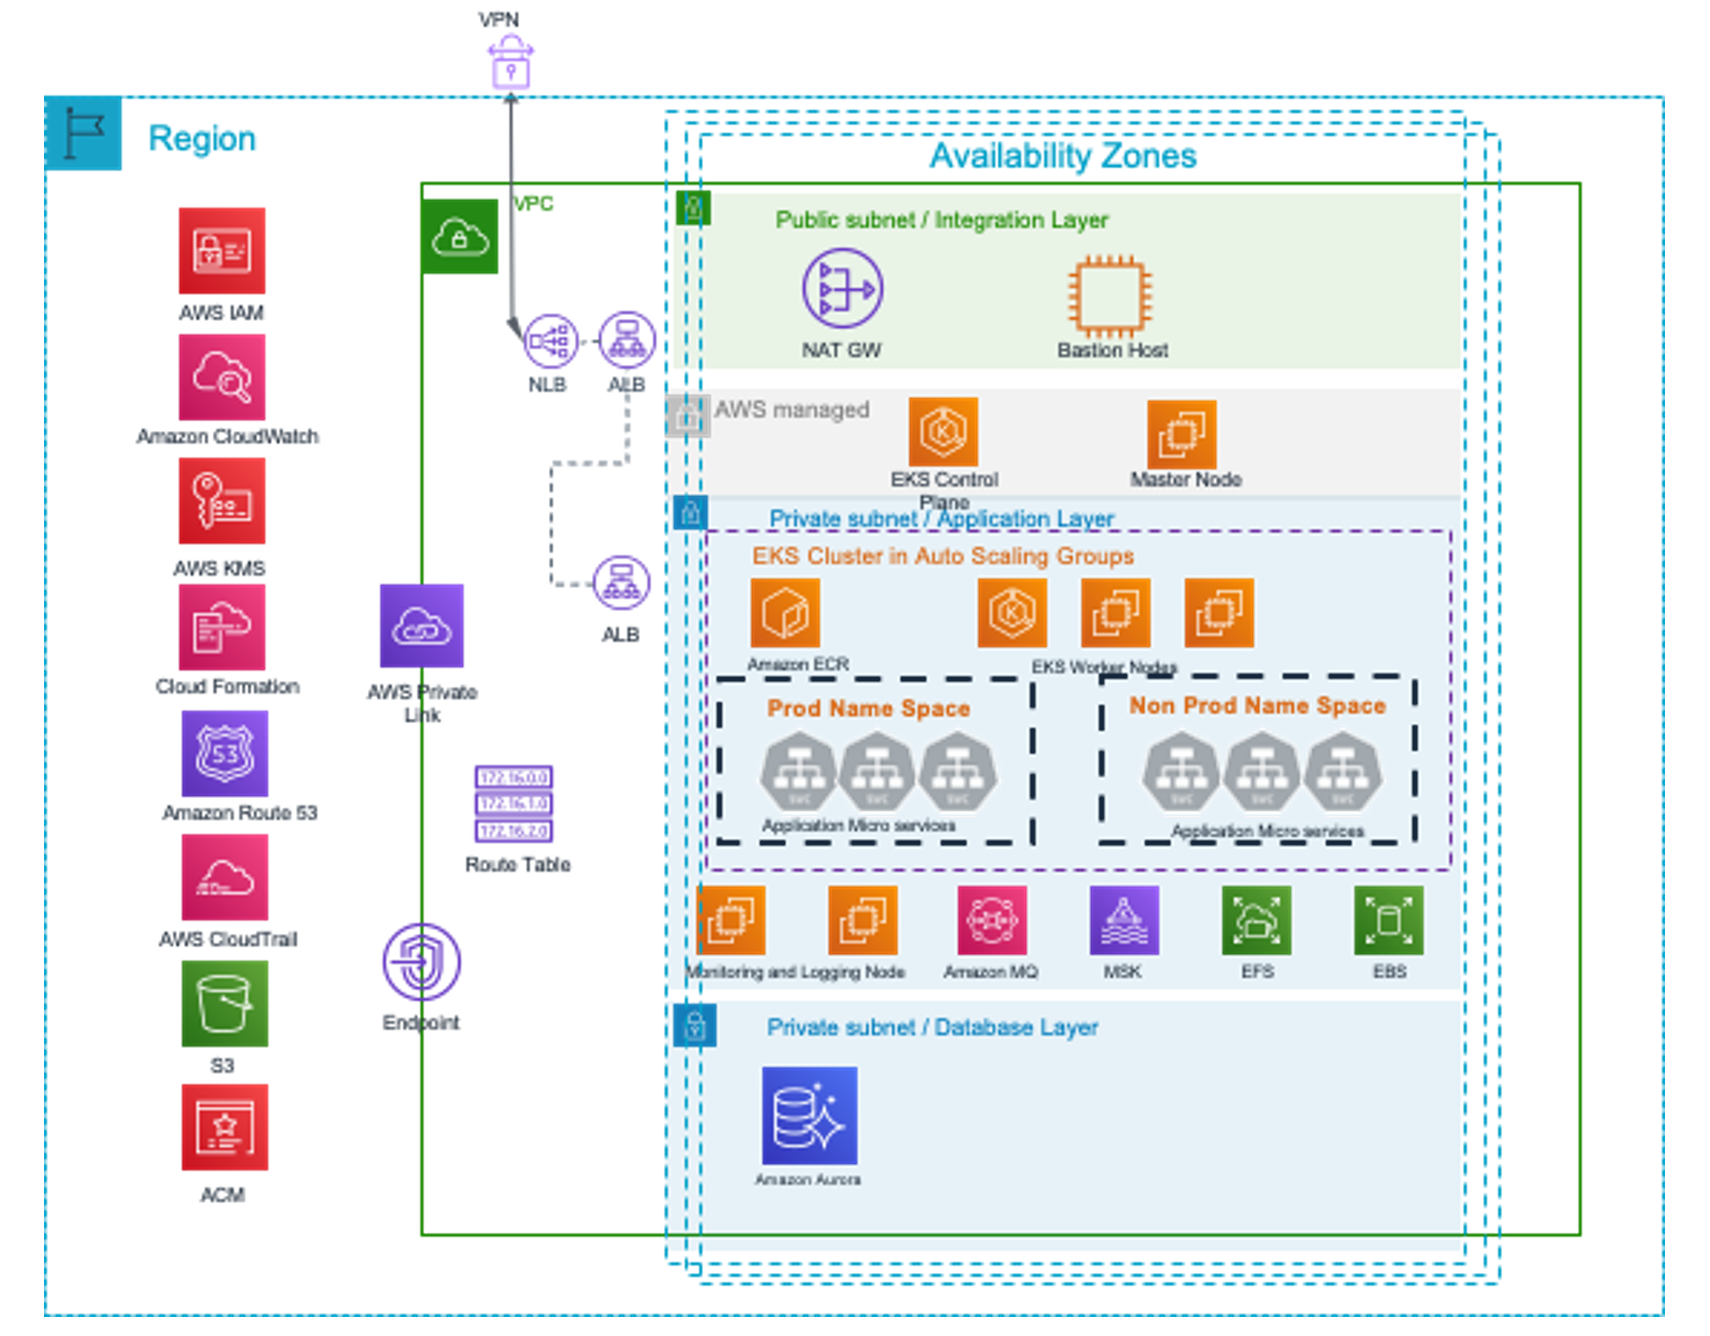 Architecture diagram showing the building blocks of Netcracker active resource inventory deployment architecture on AWS